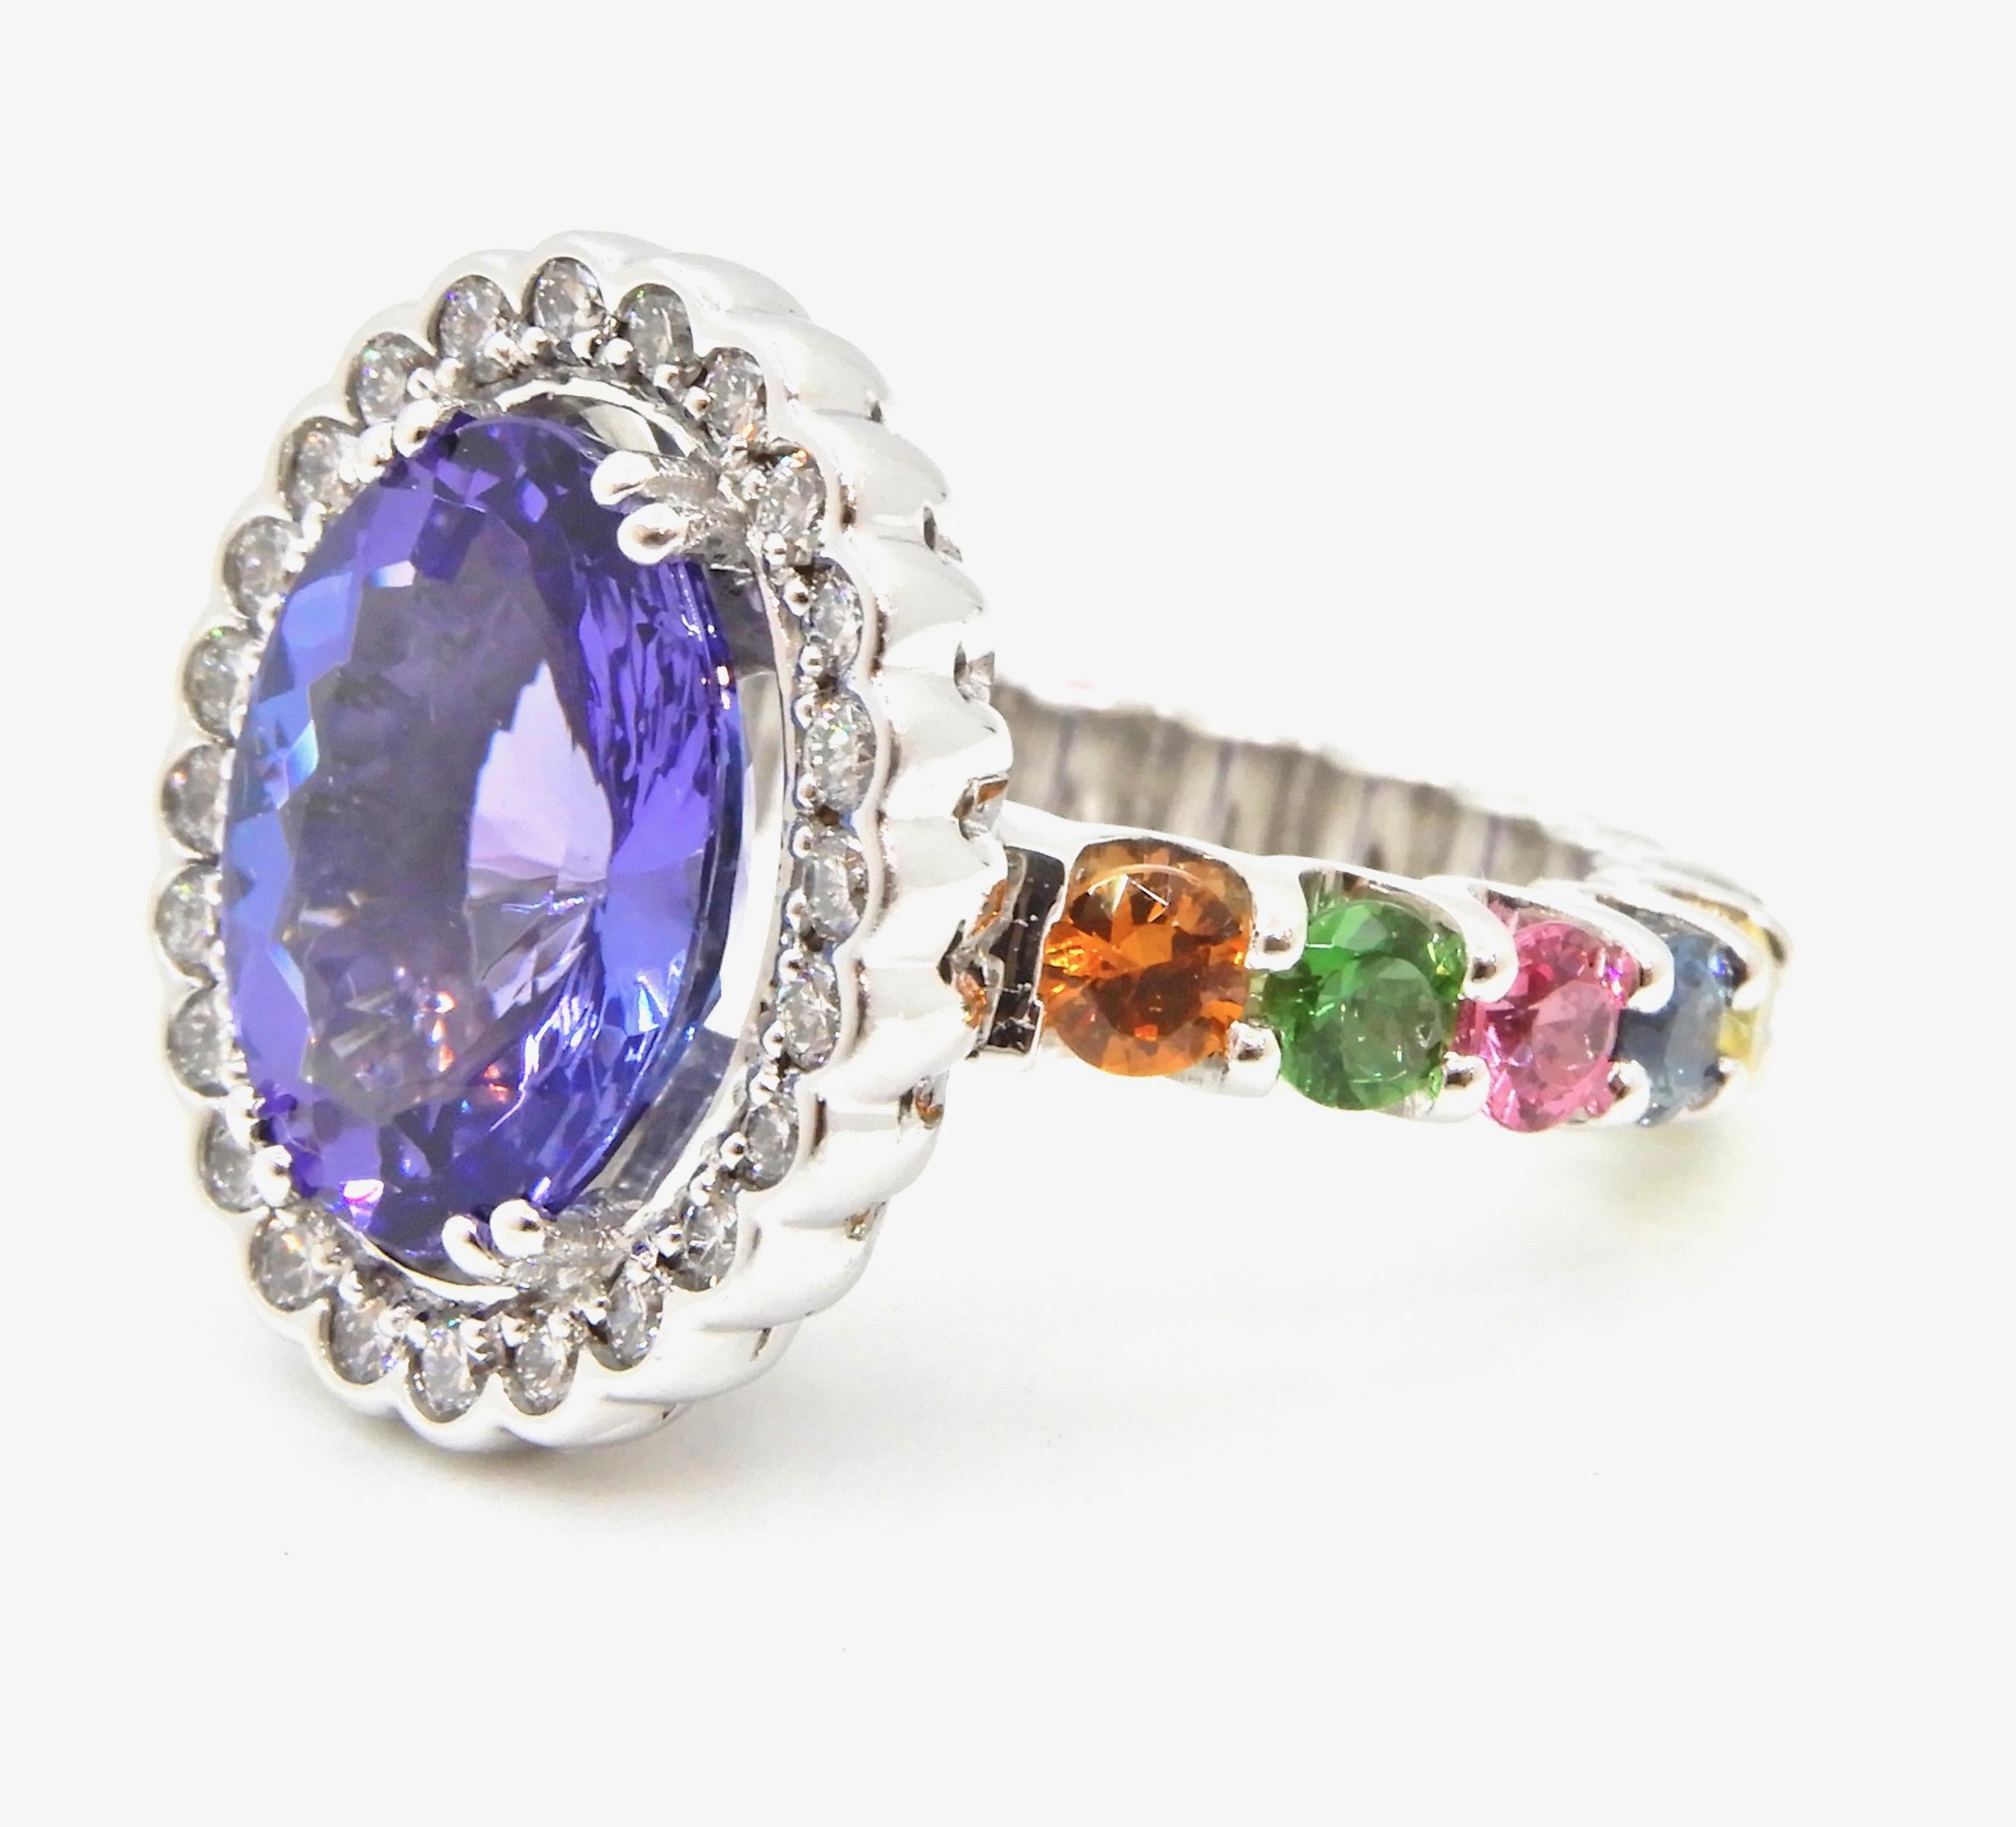 This 4.65 Carat Oval Tanzanite Diamond and Rainbow Gemstone Cocktail Ring just says FUN!

Featuring a 4.65 carat oval purplish blue tanzanite in 4 split claws, surrounded by 24 x 0.01 carat round cut brilliant G VS diamonds in scalloped edge